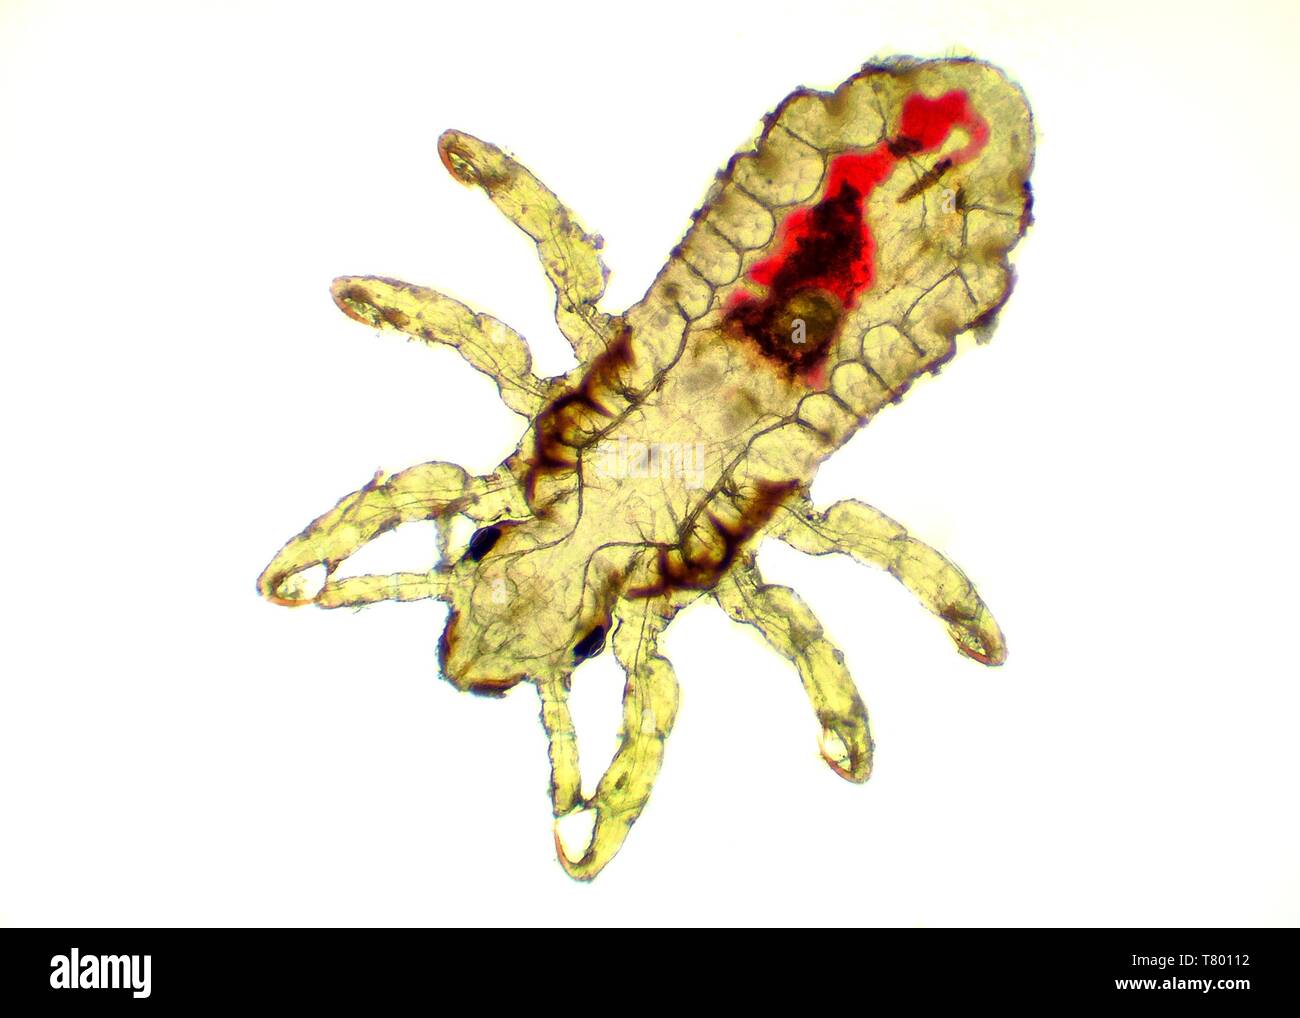 Head Louse - Pediculus capitis, microscope picture, blood inside its body Stock Photo